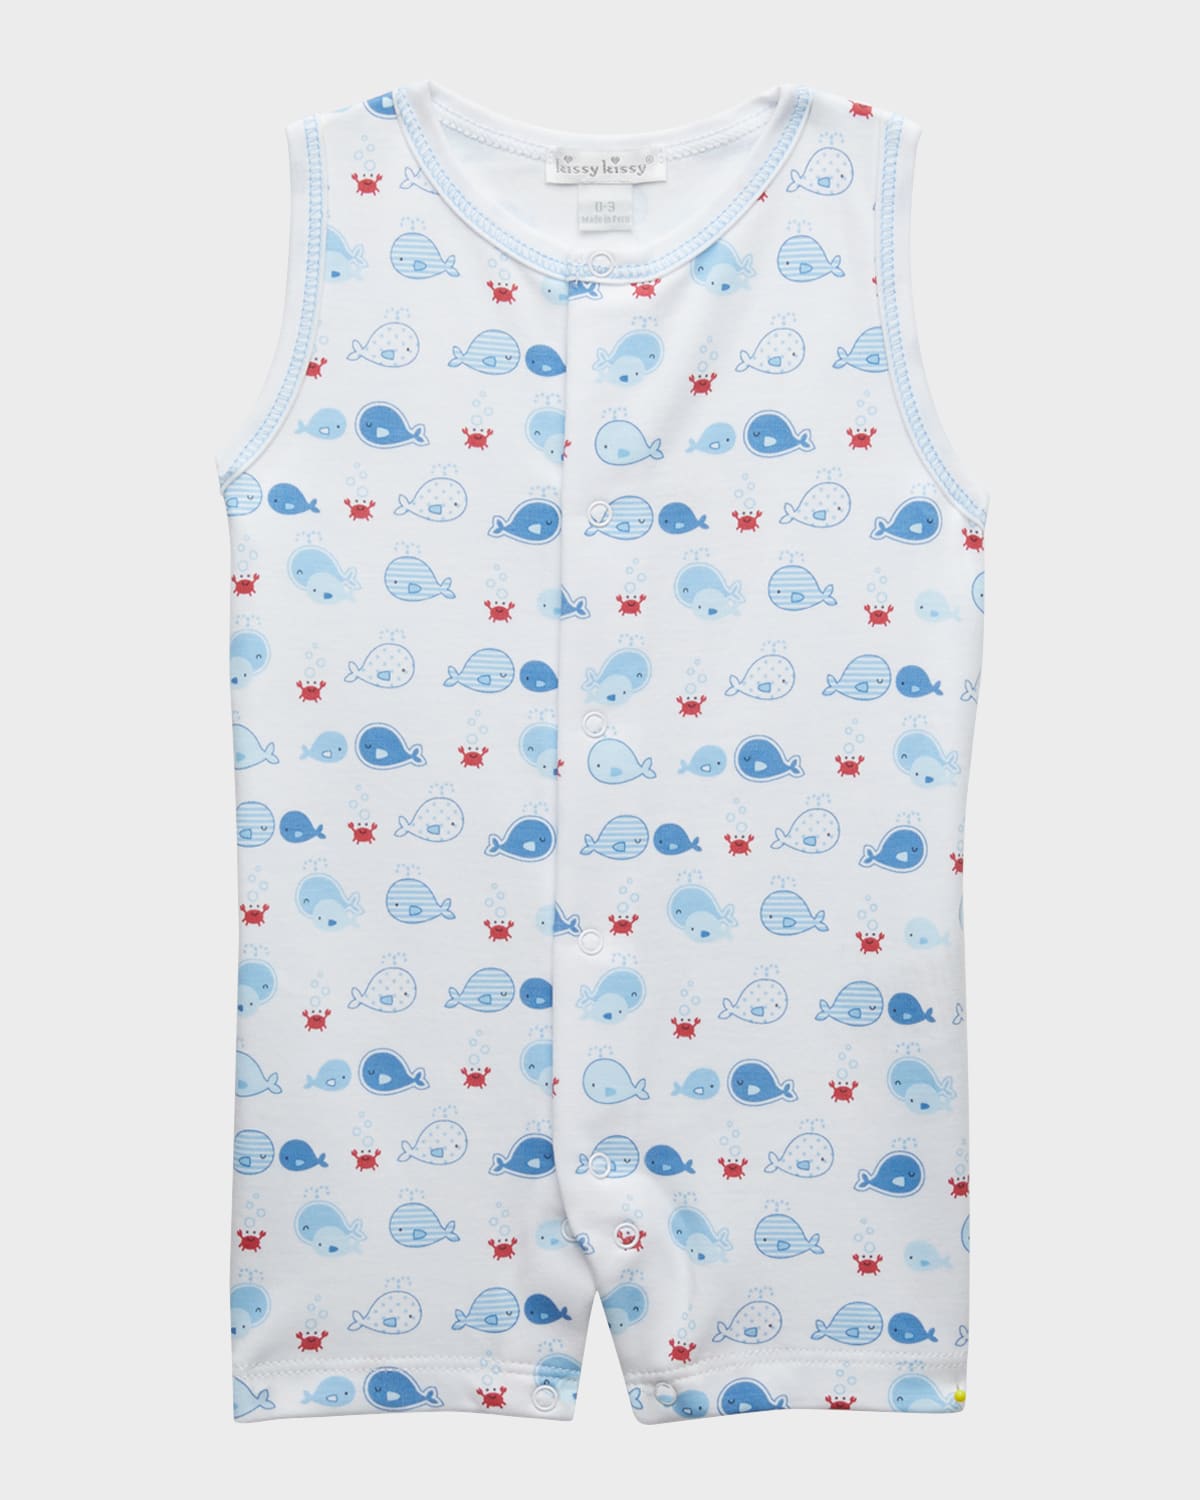 Boy's Whale Watch Printed Playsuit, Size 3M-24M